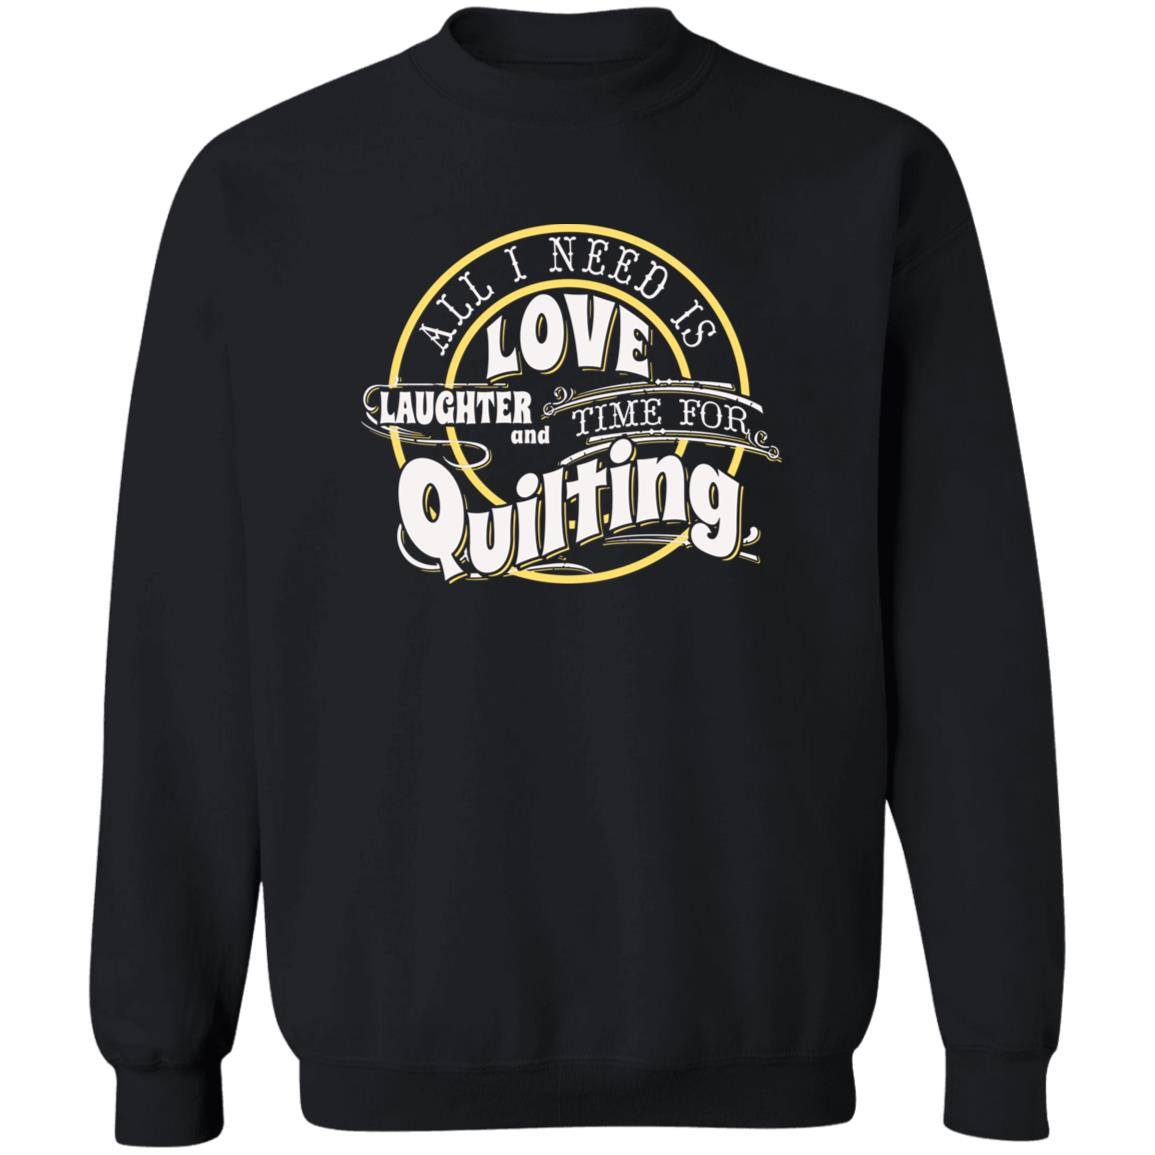 Time for Quilting Sweatshirt